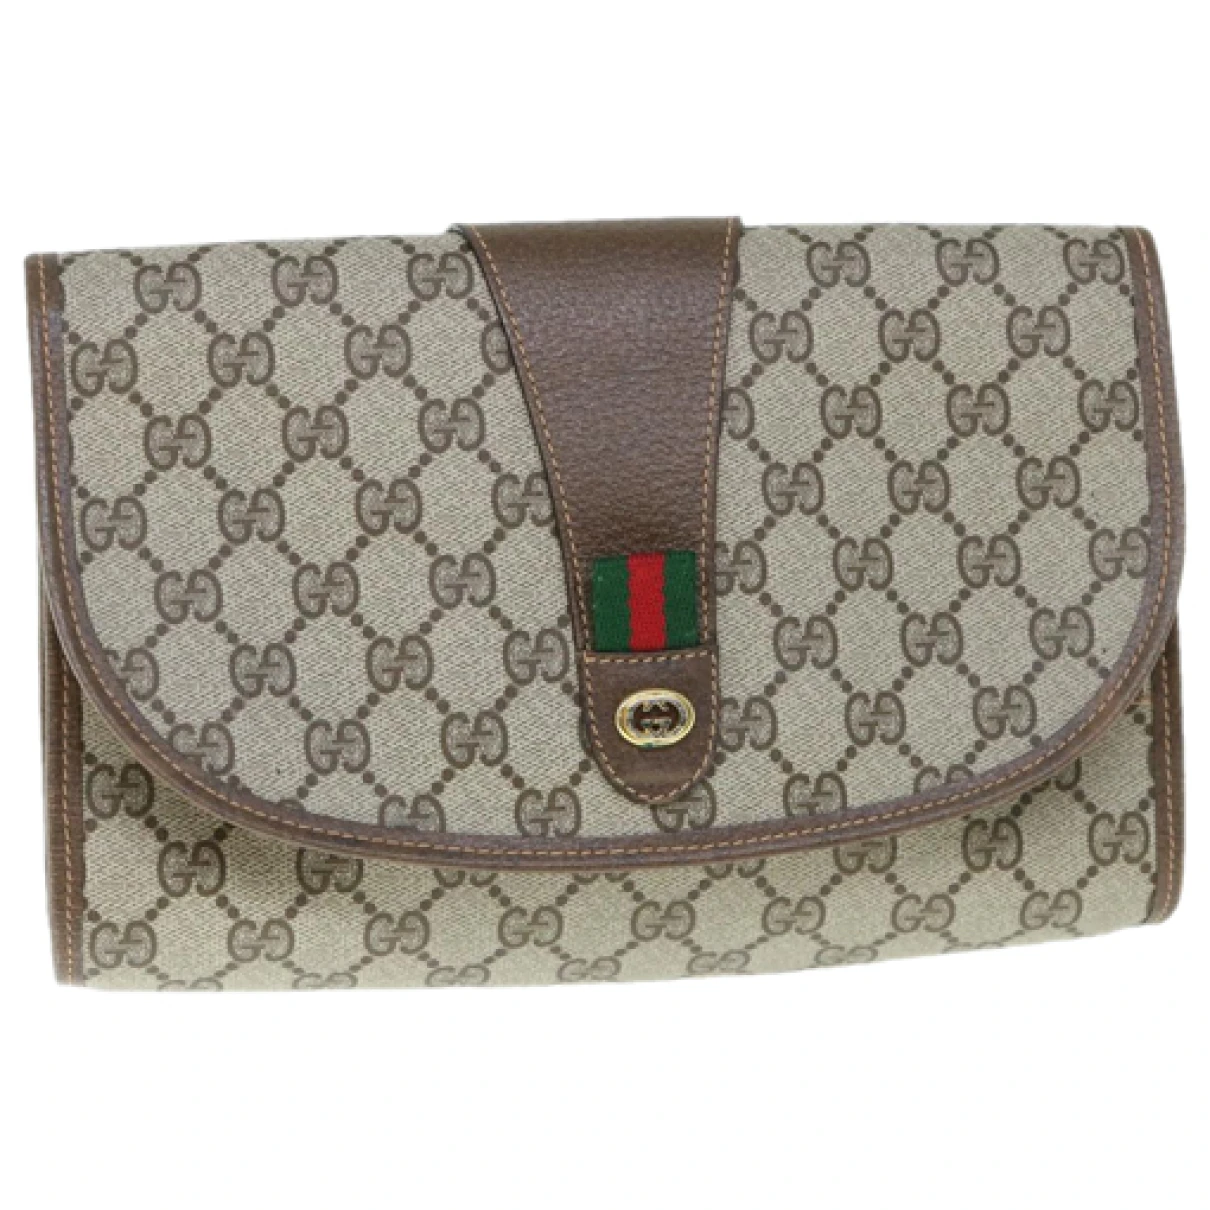 Pre-owned Gucci Leather Clutch Bag In Beige